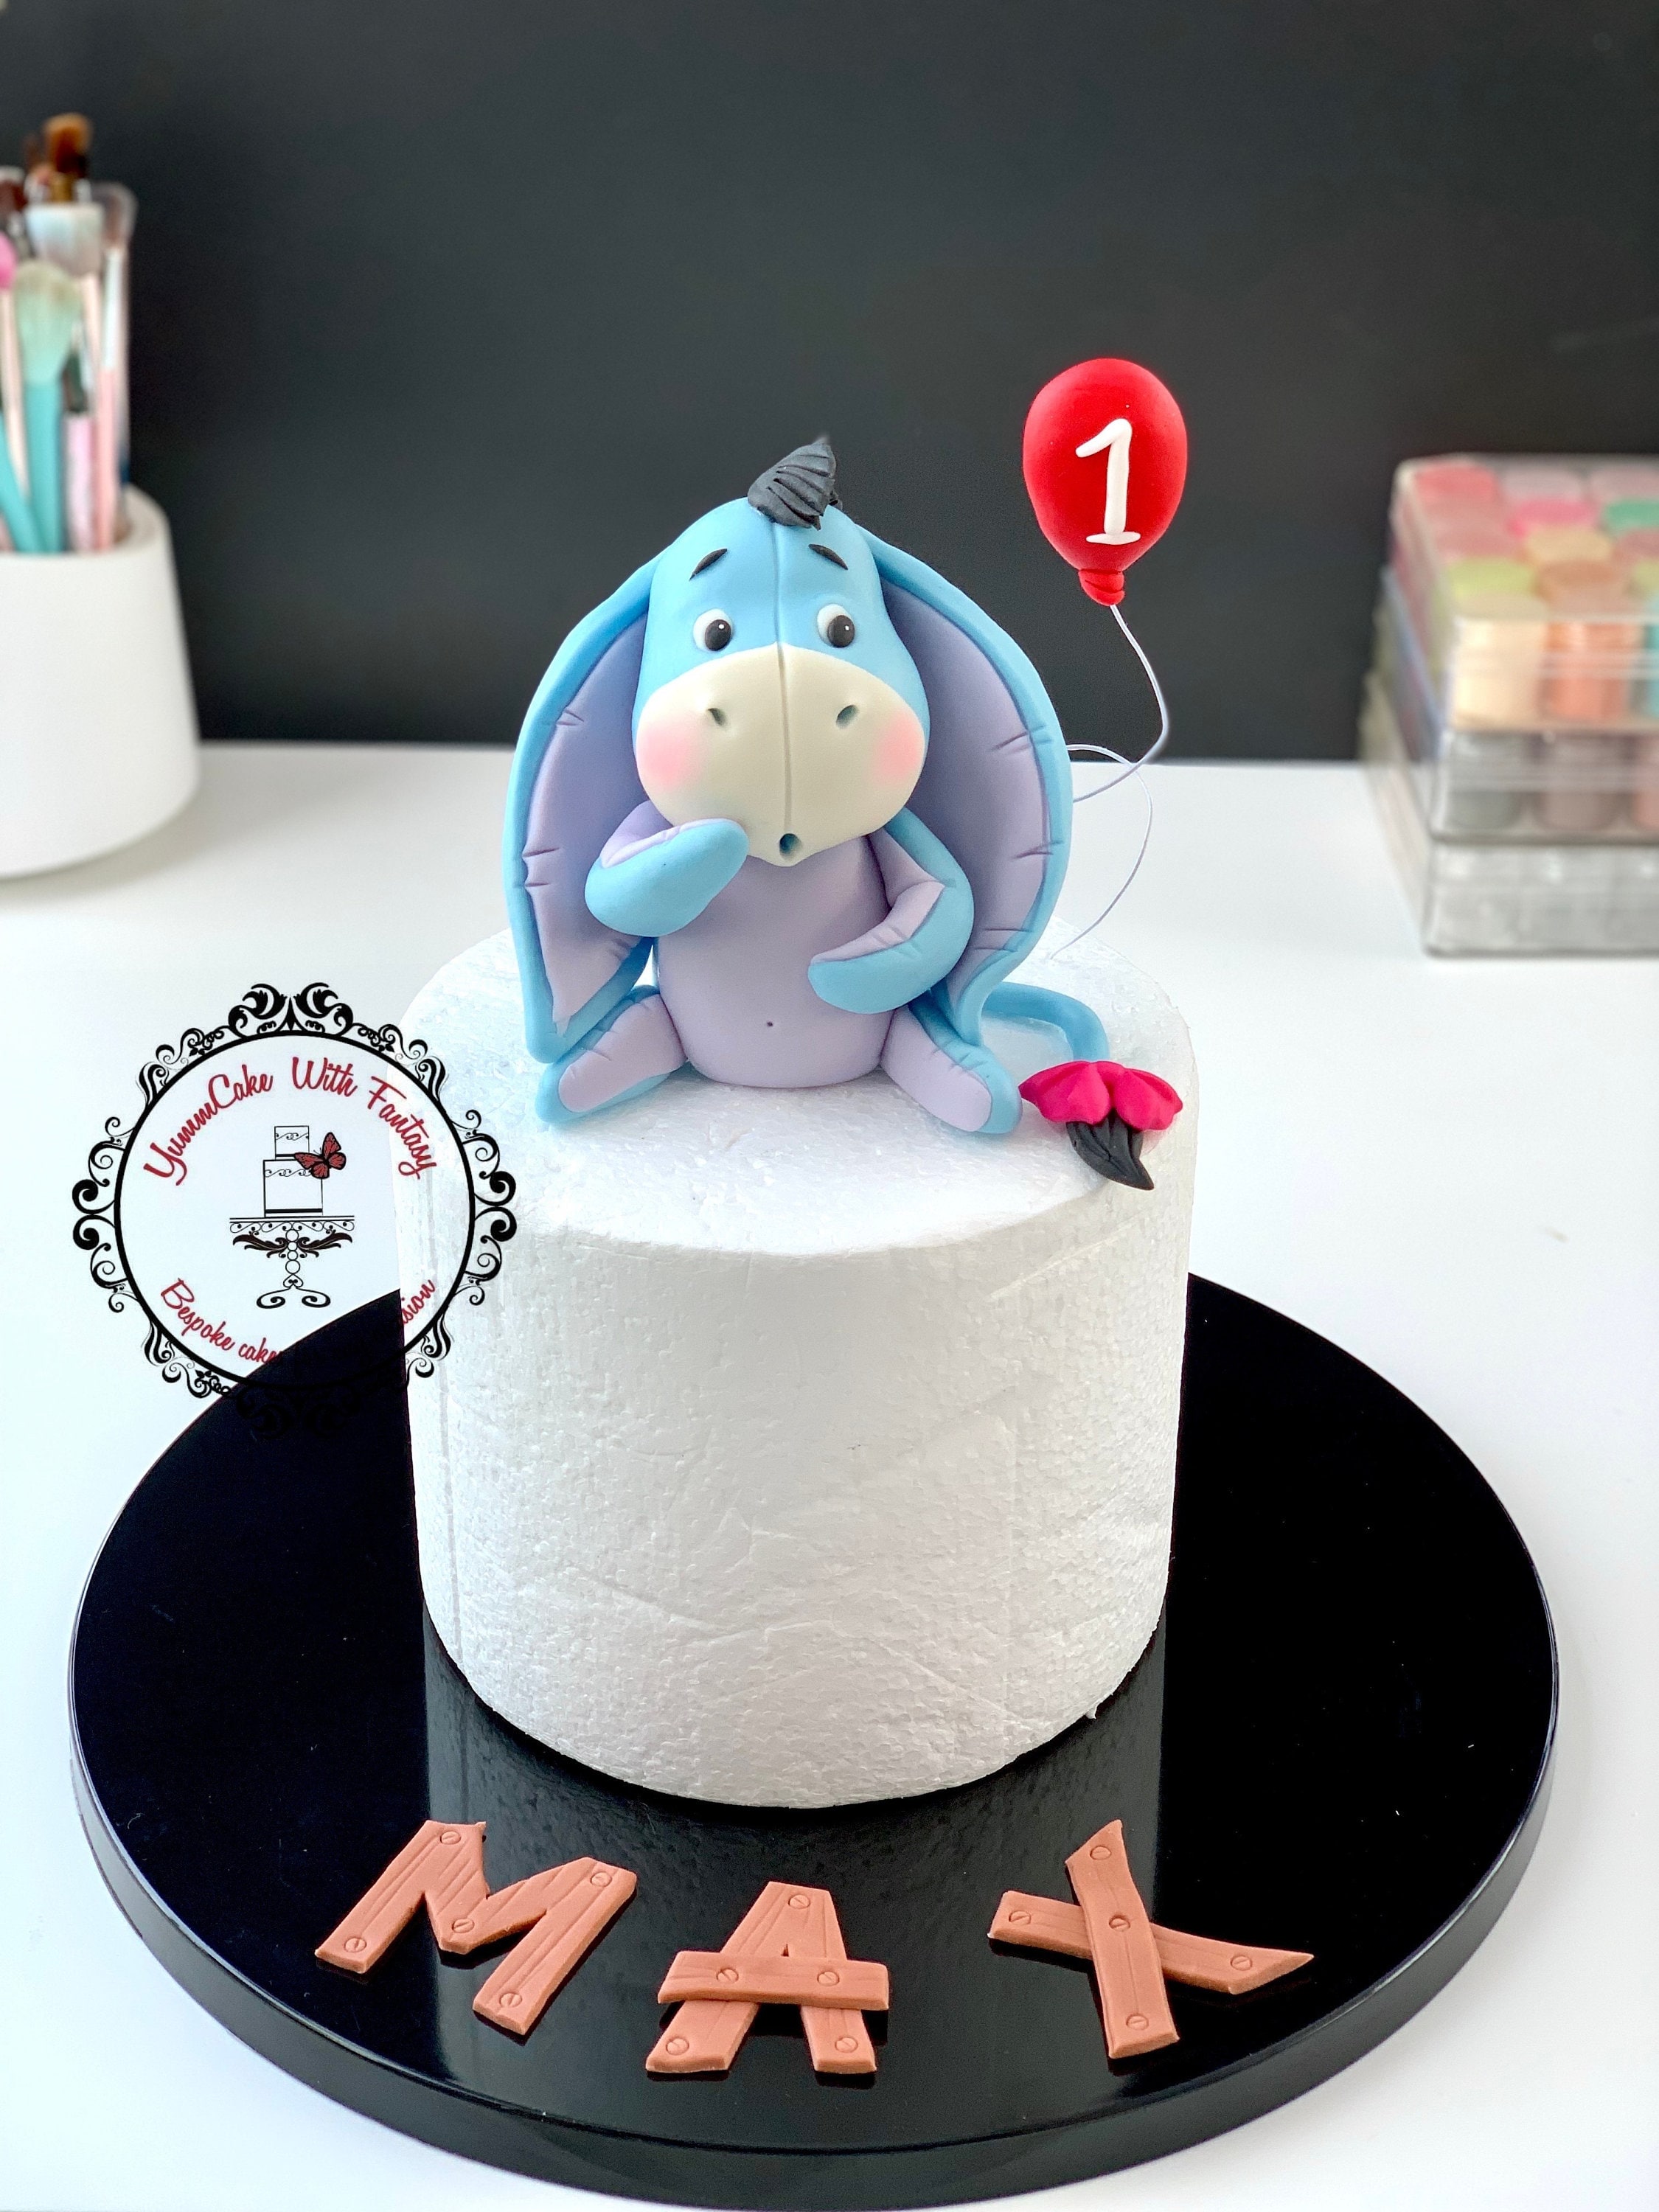 1st Birthday Pooh Cake Toppers, Piglet Cake Topper, Eeyore Cake Topper, One  Cake Topper, Tigger Cake Topper, 1st Birthday Cake Decorations -  Norway